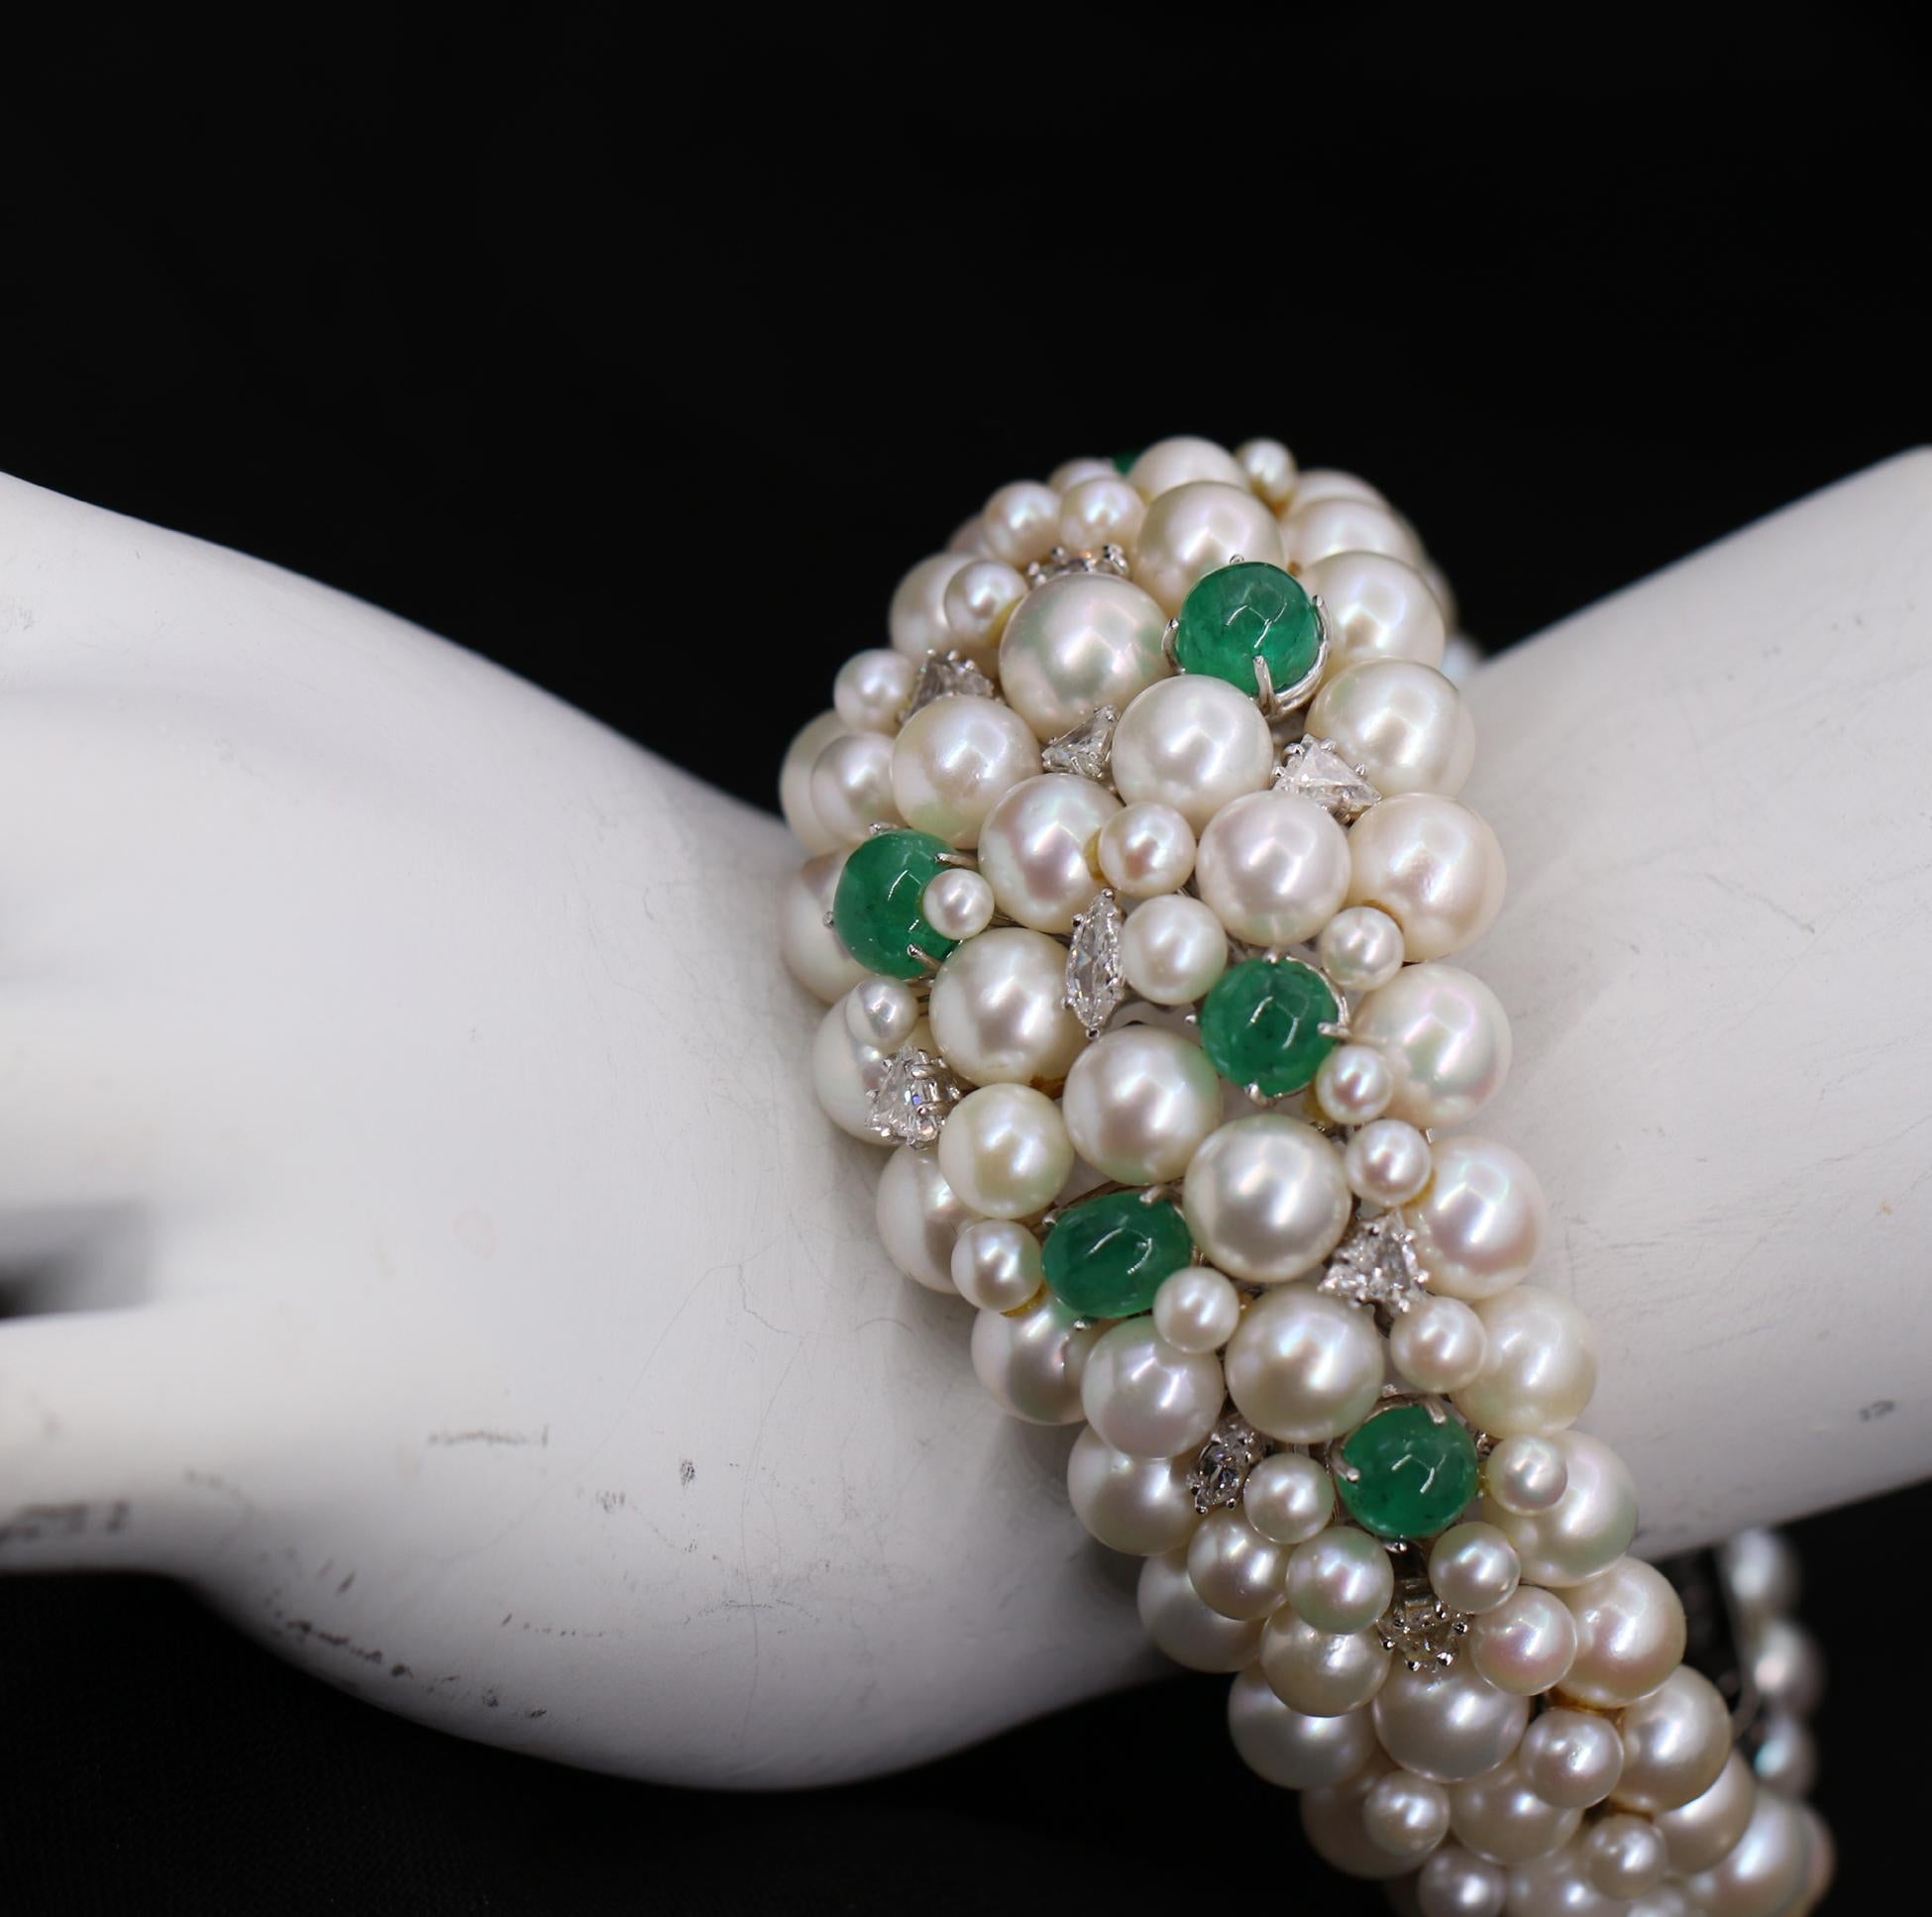 A creative bracelet of bubbly pearls rising above a white gold frame, set with 6 cabochon emeralds, 7 triangular cut diamonds, and 3 marquise cut diamonds. The emeralds weigh a total of approximately 1.75ct, and are an evenly balanced green color.